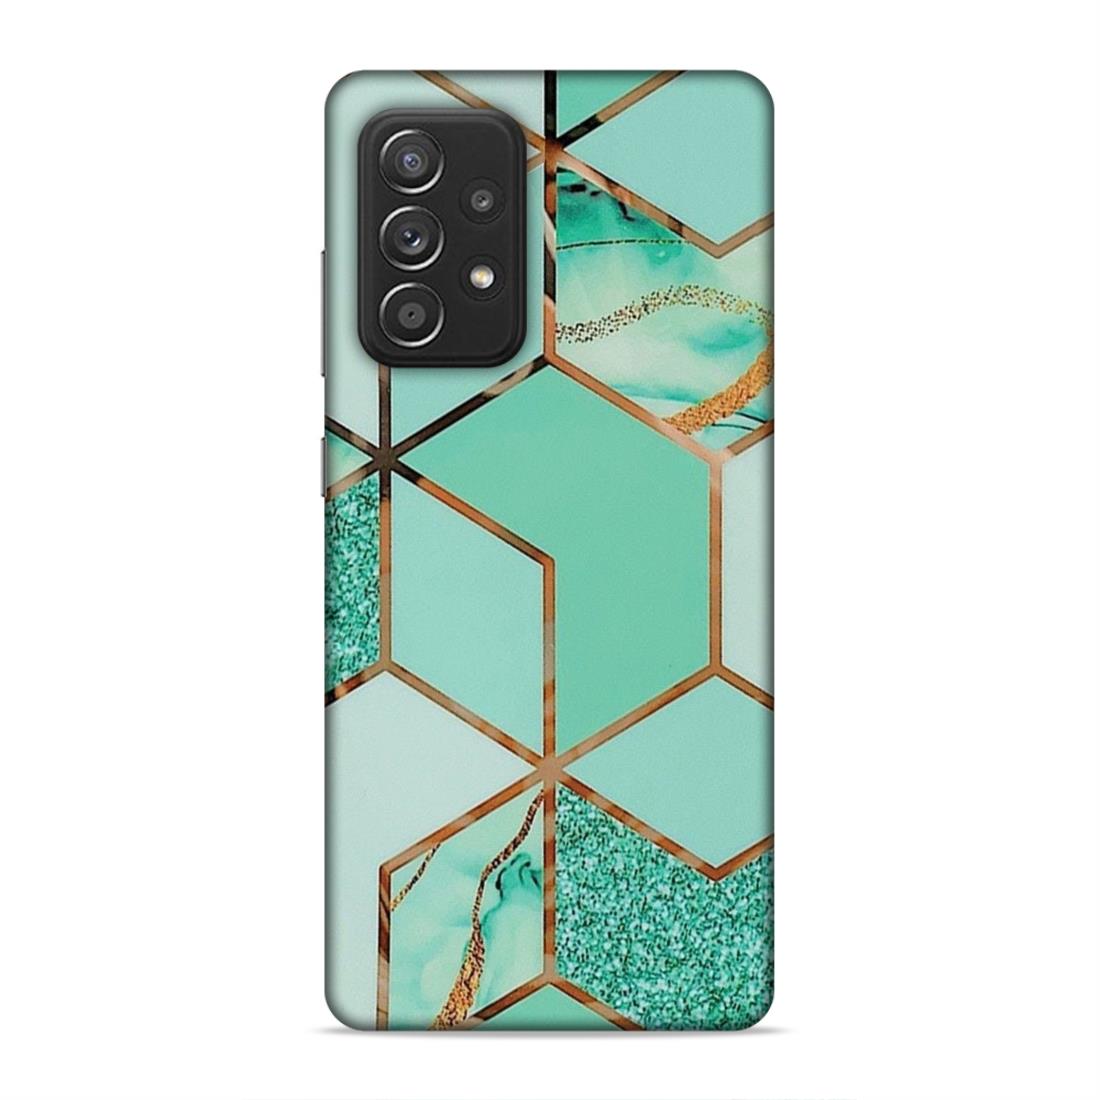 Hexagonal Marble Pattern Hard Back Case For Samsung Galaxy A52 / A52s 5G